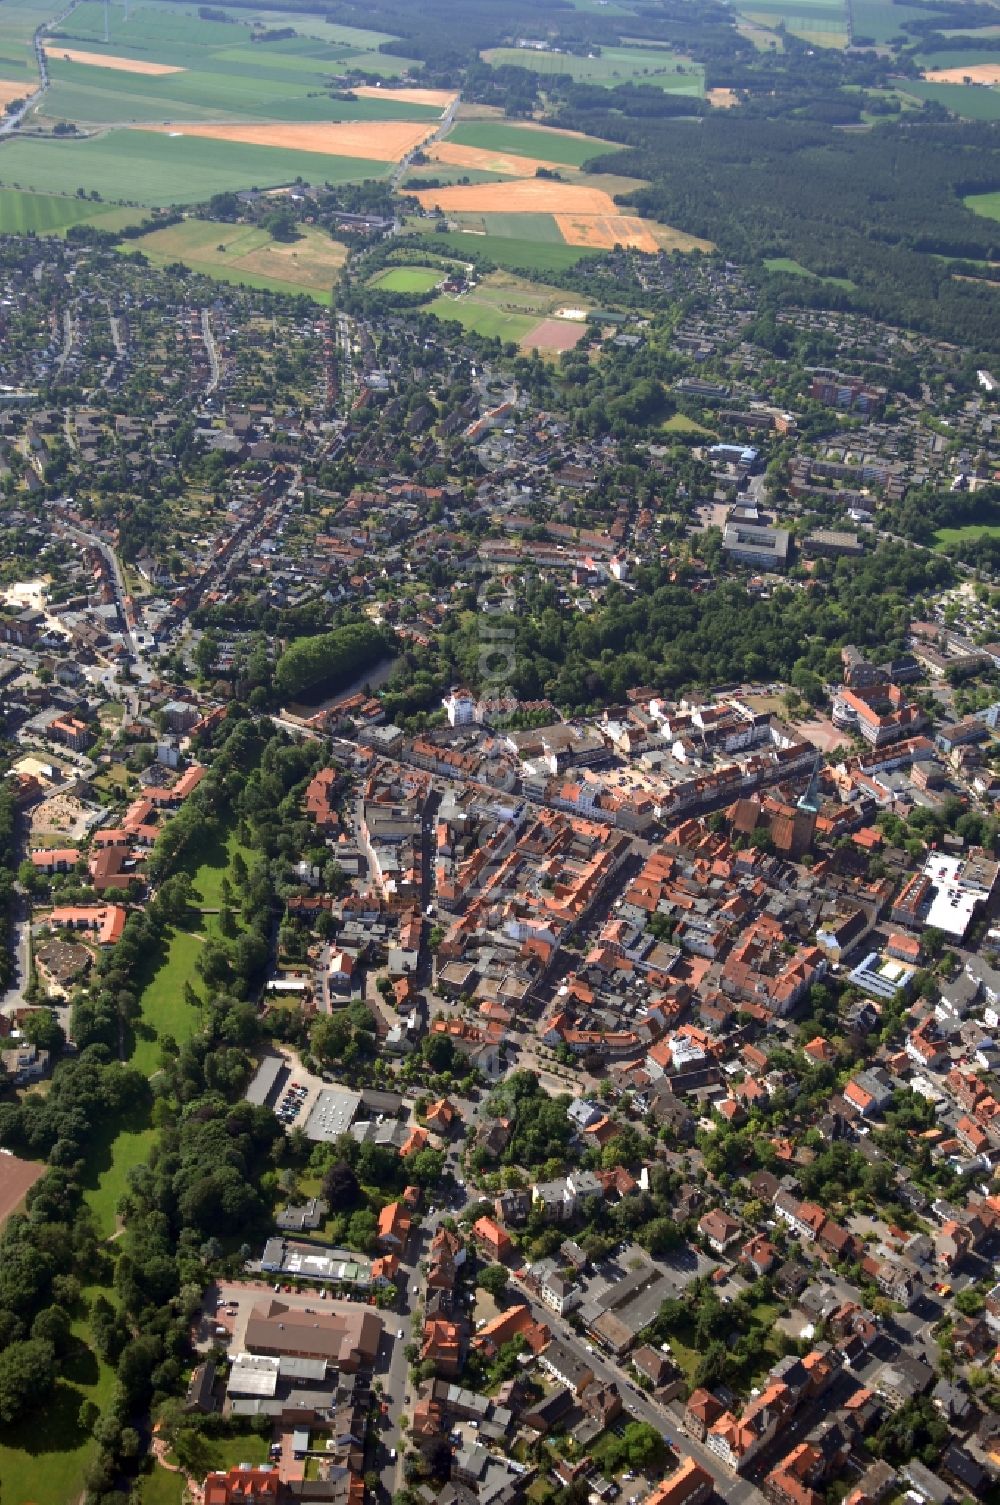 Uelzen from the bird's eye view: The city center in the downtown area in Uelzen in the state Lower Saxony, Germany